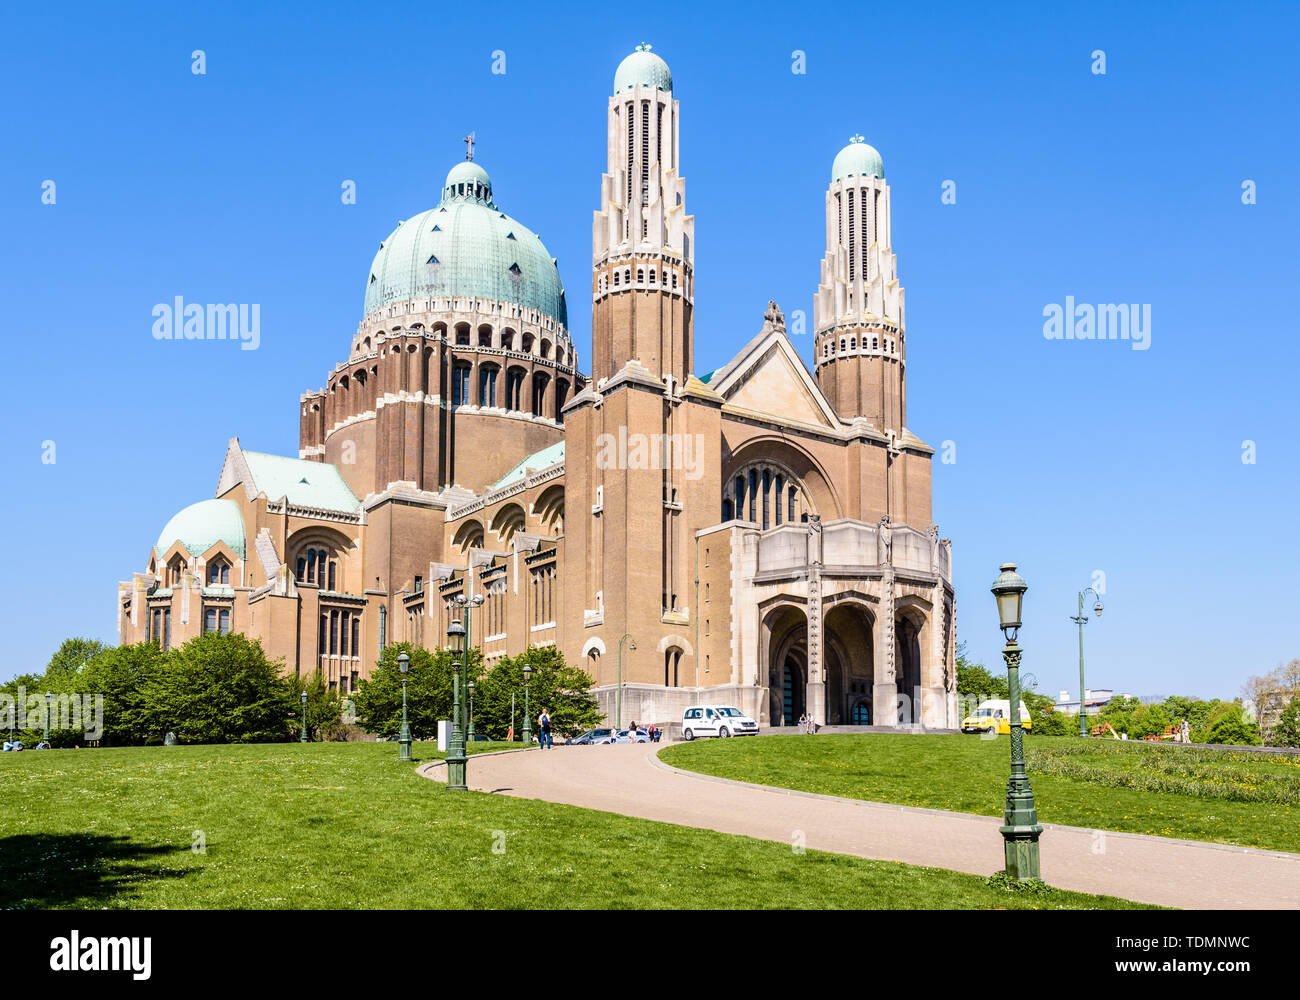 Three-quarter front view of the National Basilica of the Sacred Heart, located in the Elisabeth park in Koekelberg, Brussels-Capital region, Belgium. Stock Photo